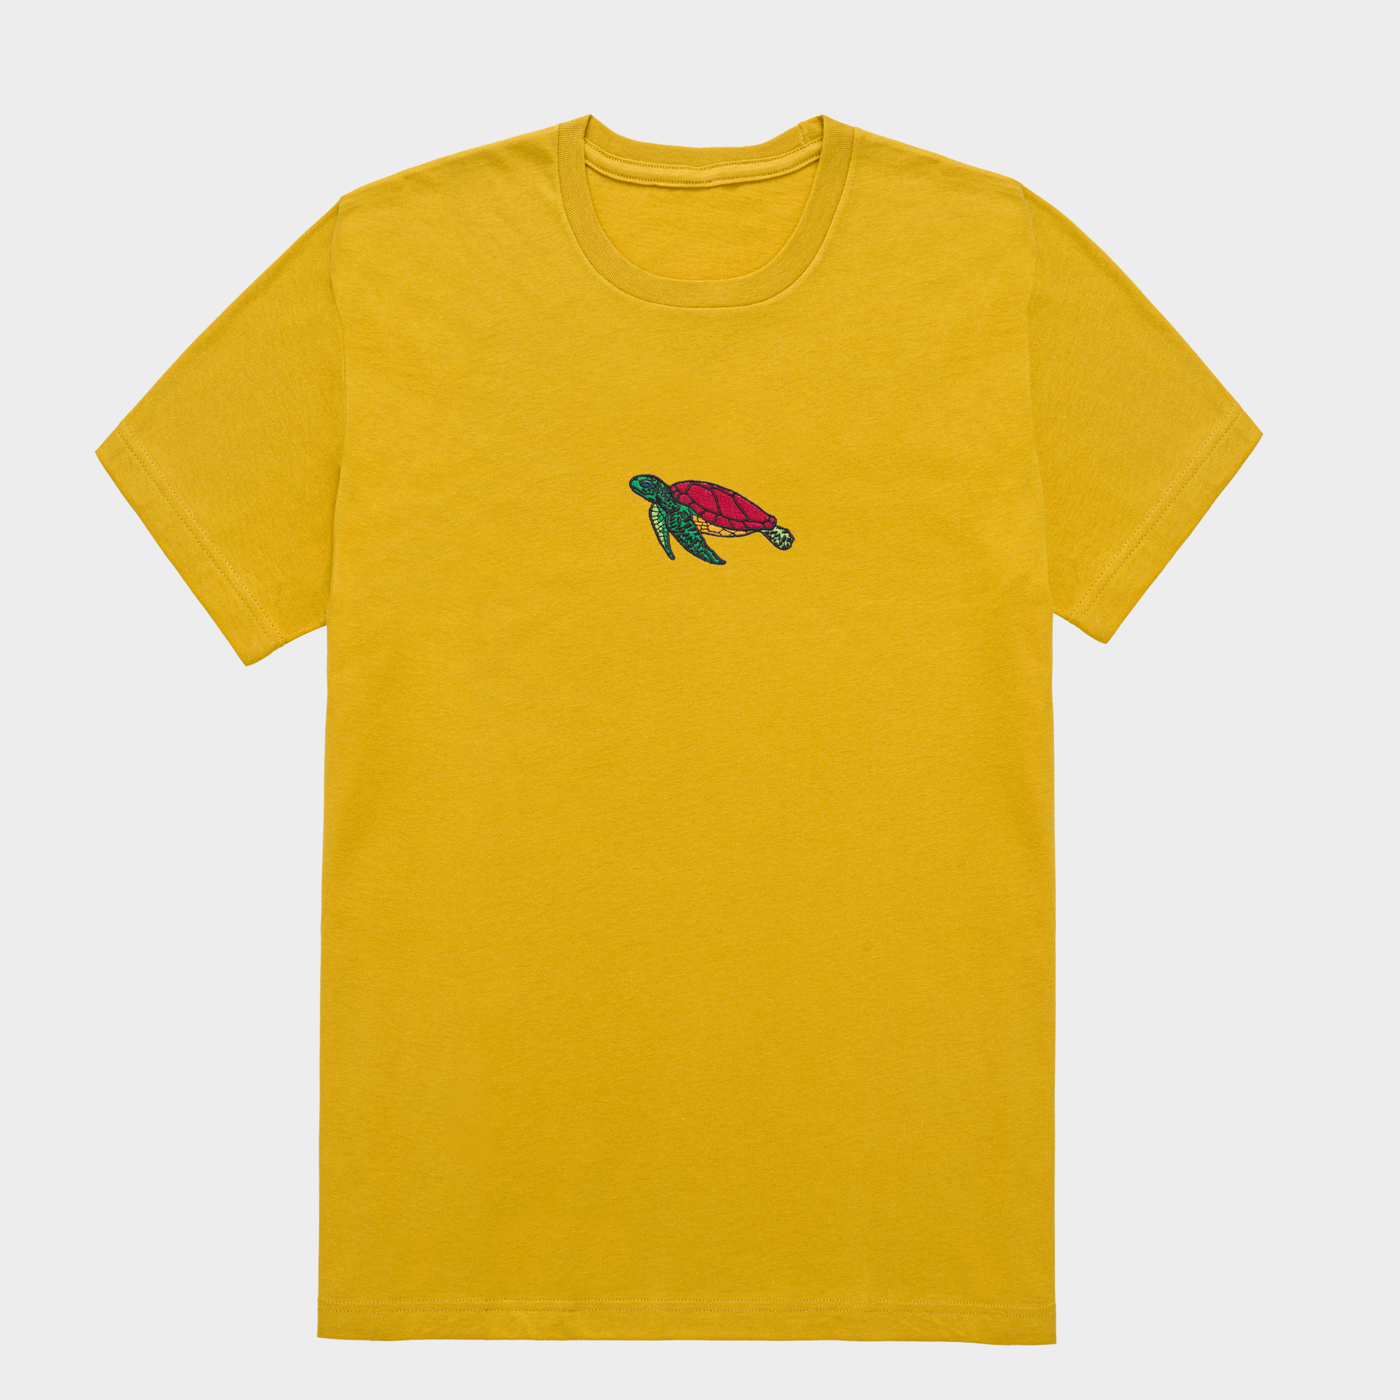 Bobby's Planet Women's Embroidered Sea Turtle T-Shirt from Seven Seas Fish Animals Collection in Mustard Color#color_mustard